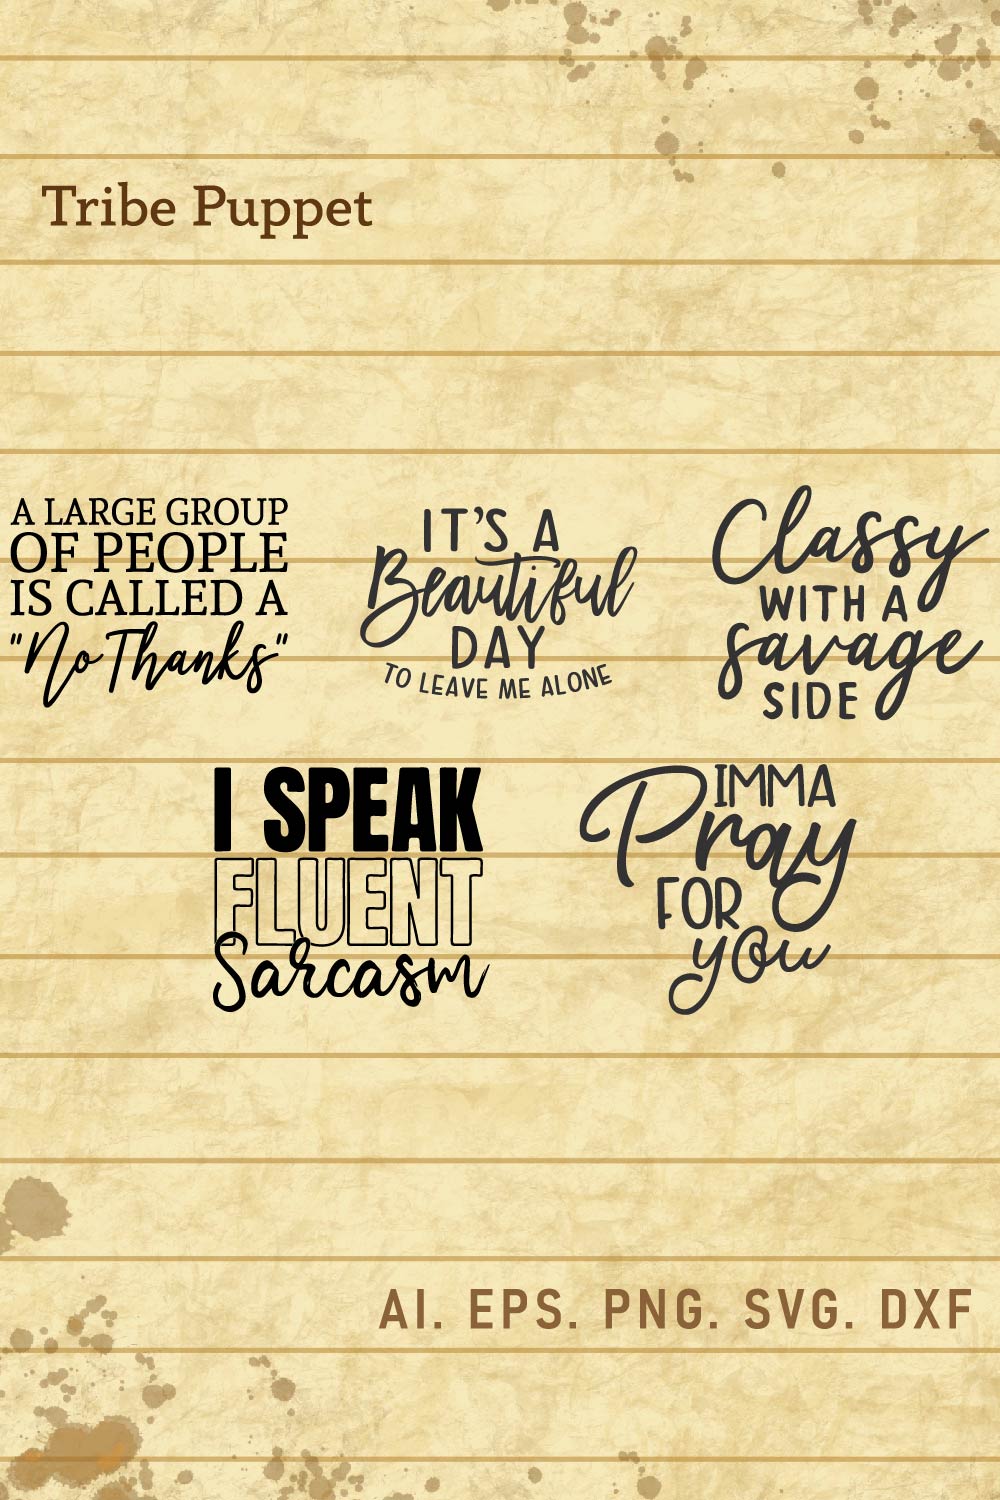 Sarcastic typography pinterest preview image.